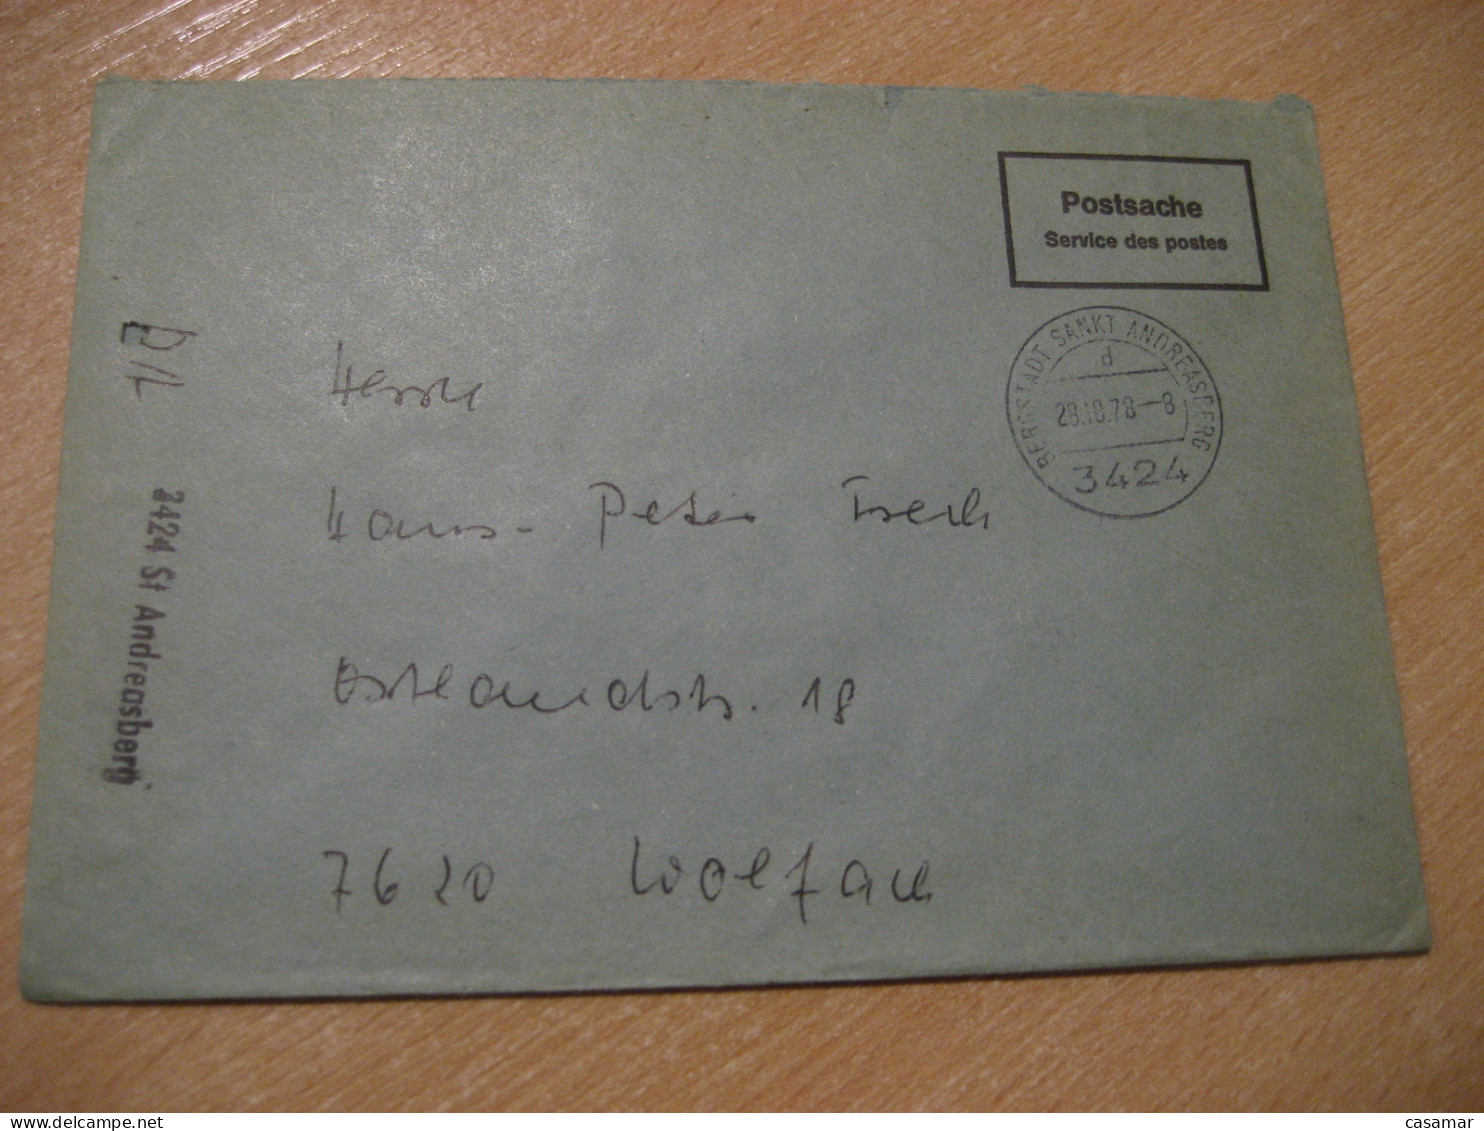 SANKT ANDREASBERG Bergstadt 1978 To Wolfach Postage Paid Cancel Cover GERMANY - Briefe U. Dokumente